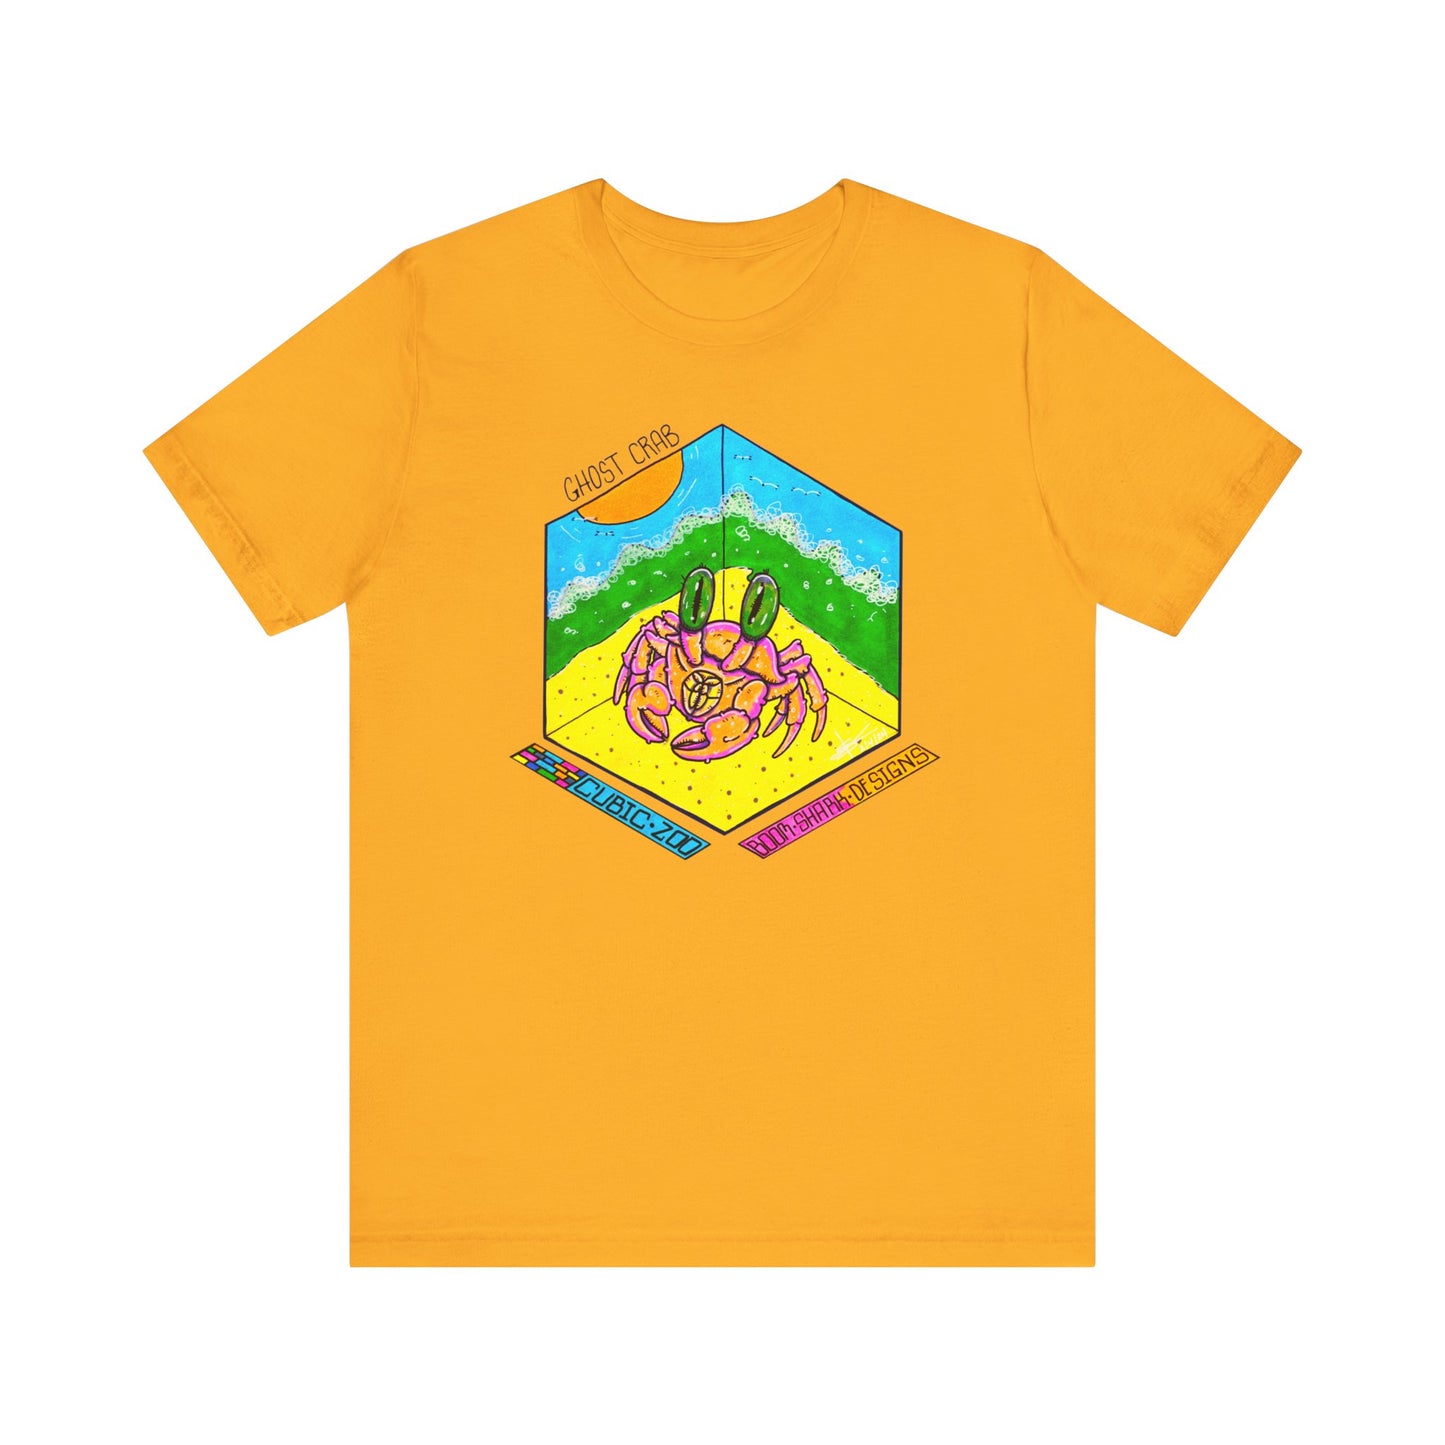 Cubic Zoo - Ghost Crab Tee